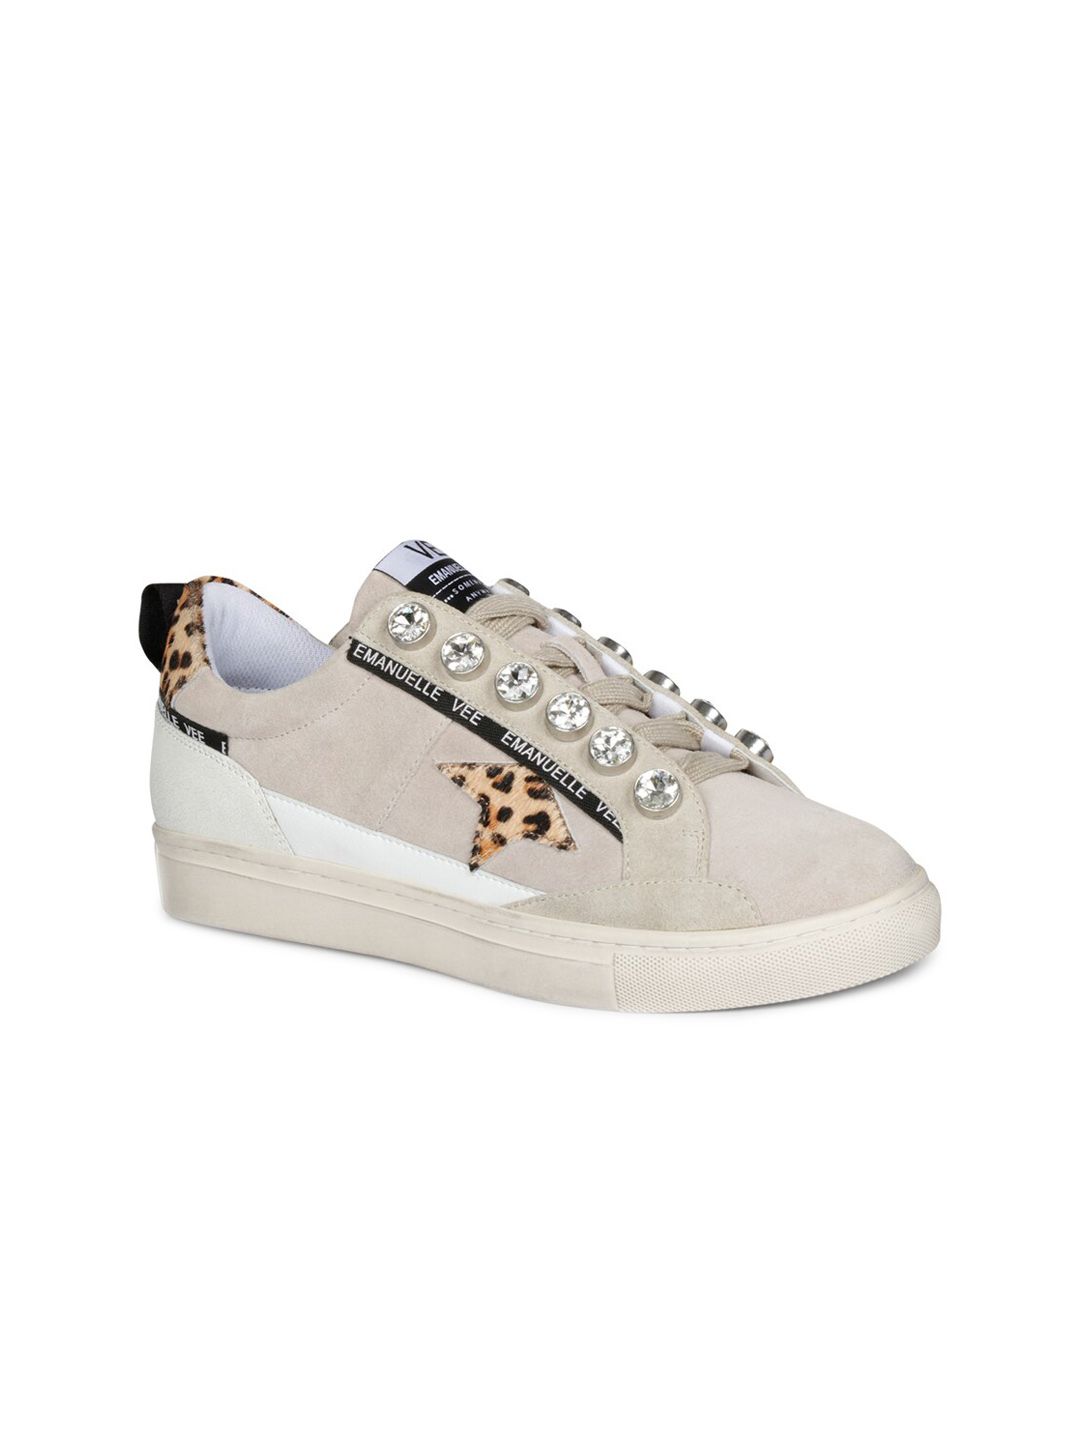 Saint G Women Off White Printed Leather Sneakers Price in India